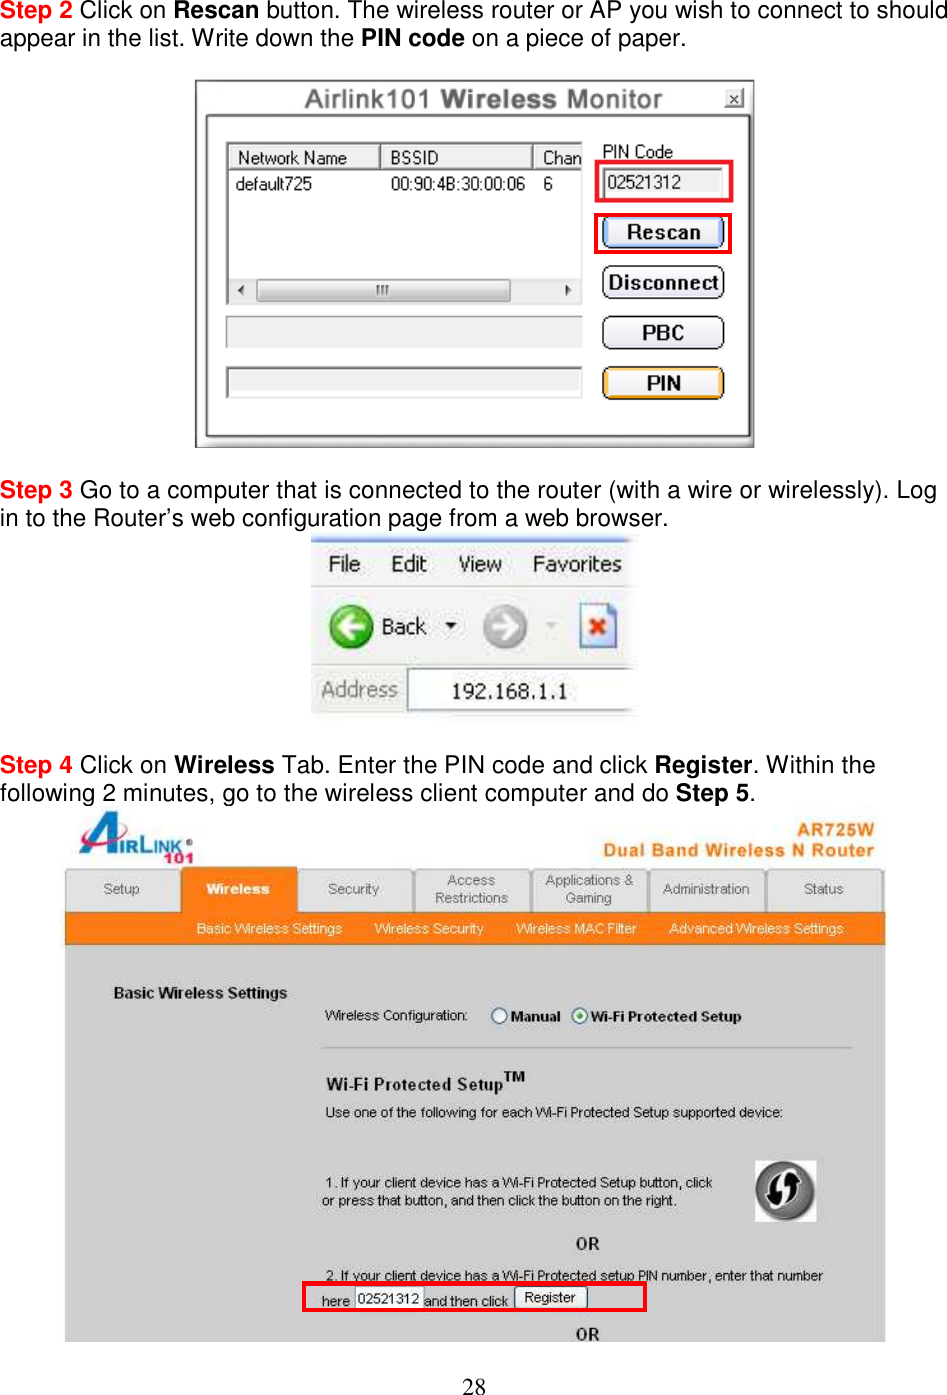 28 Step 2 Click on Rescan button. The wireless router or AP you wish to connect to should appear in the list. Write down the PIN code on a piece of paper.     Step 3 Go to a computer that is connected to the router (with a wire or wirelessly). Log in to the Router’s web configuration page from a web browser.   Step 4 Click on Wireless Tab. Enter the PIN code and click Register. Within the following 2 minutes, go to the wireless client computer and do Step 5.  